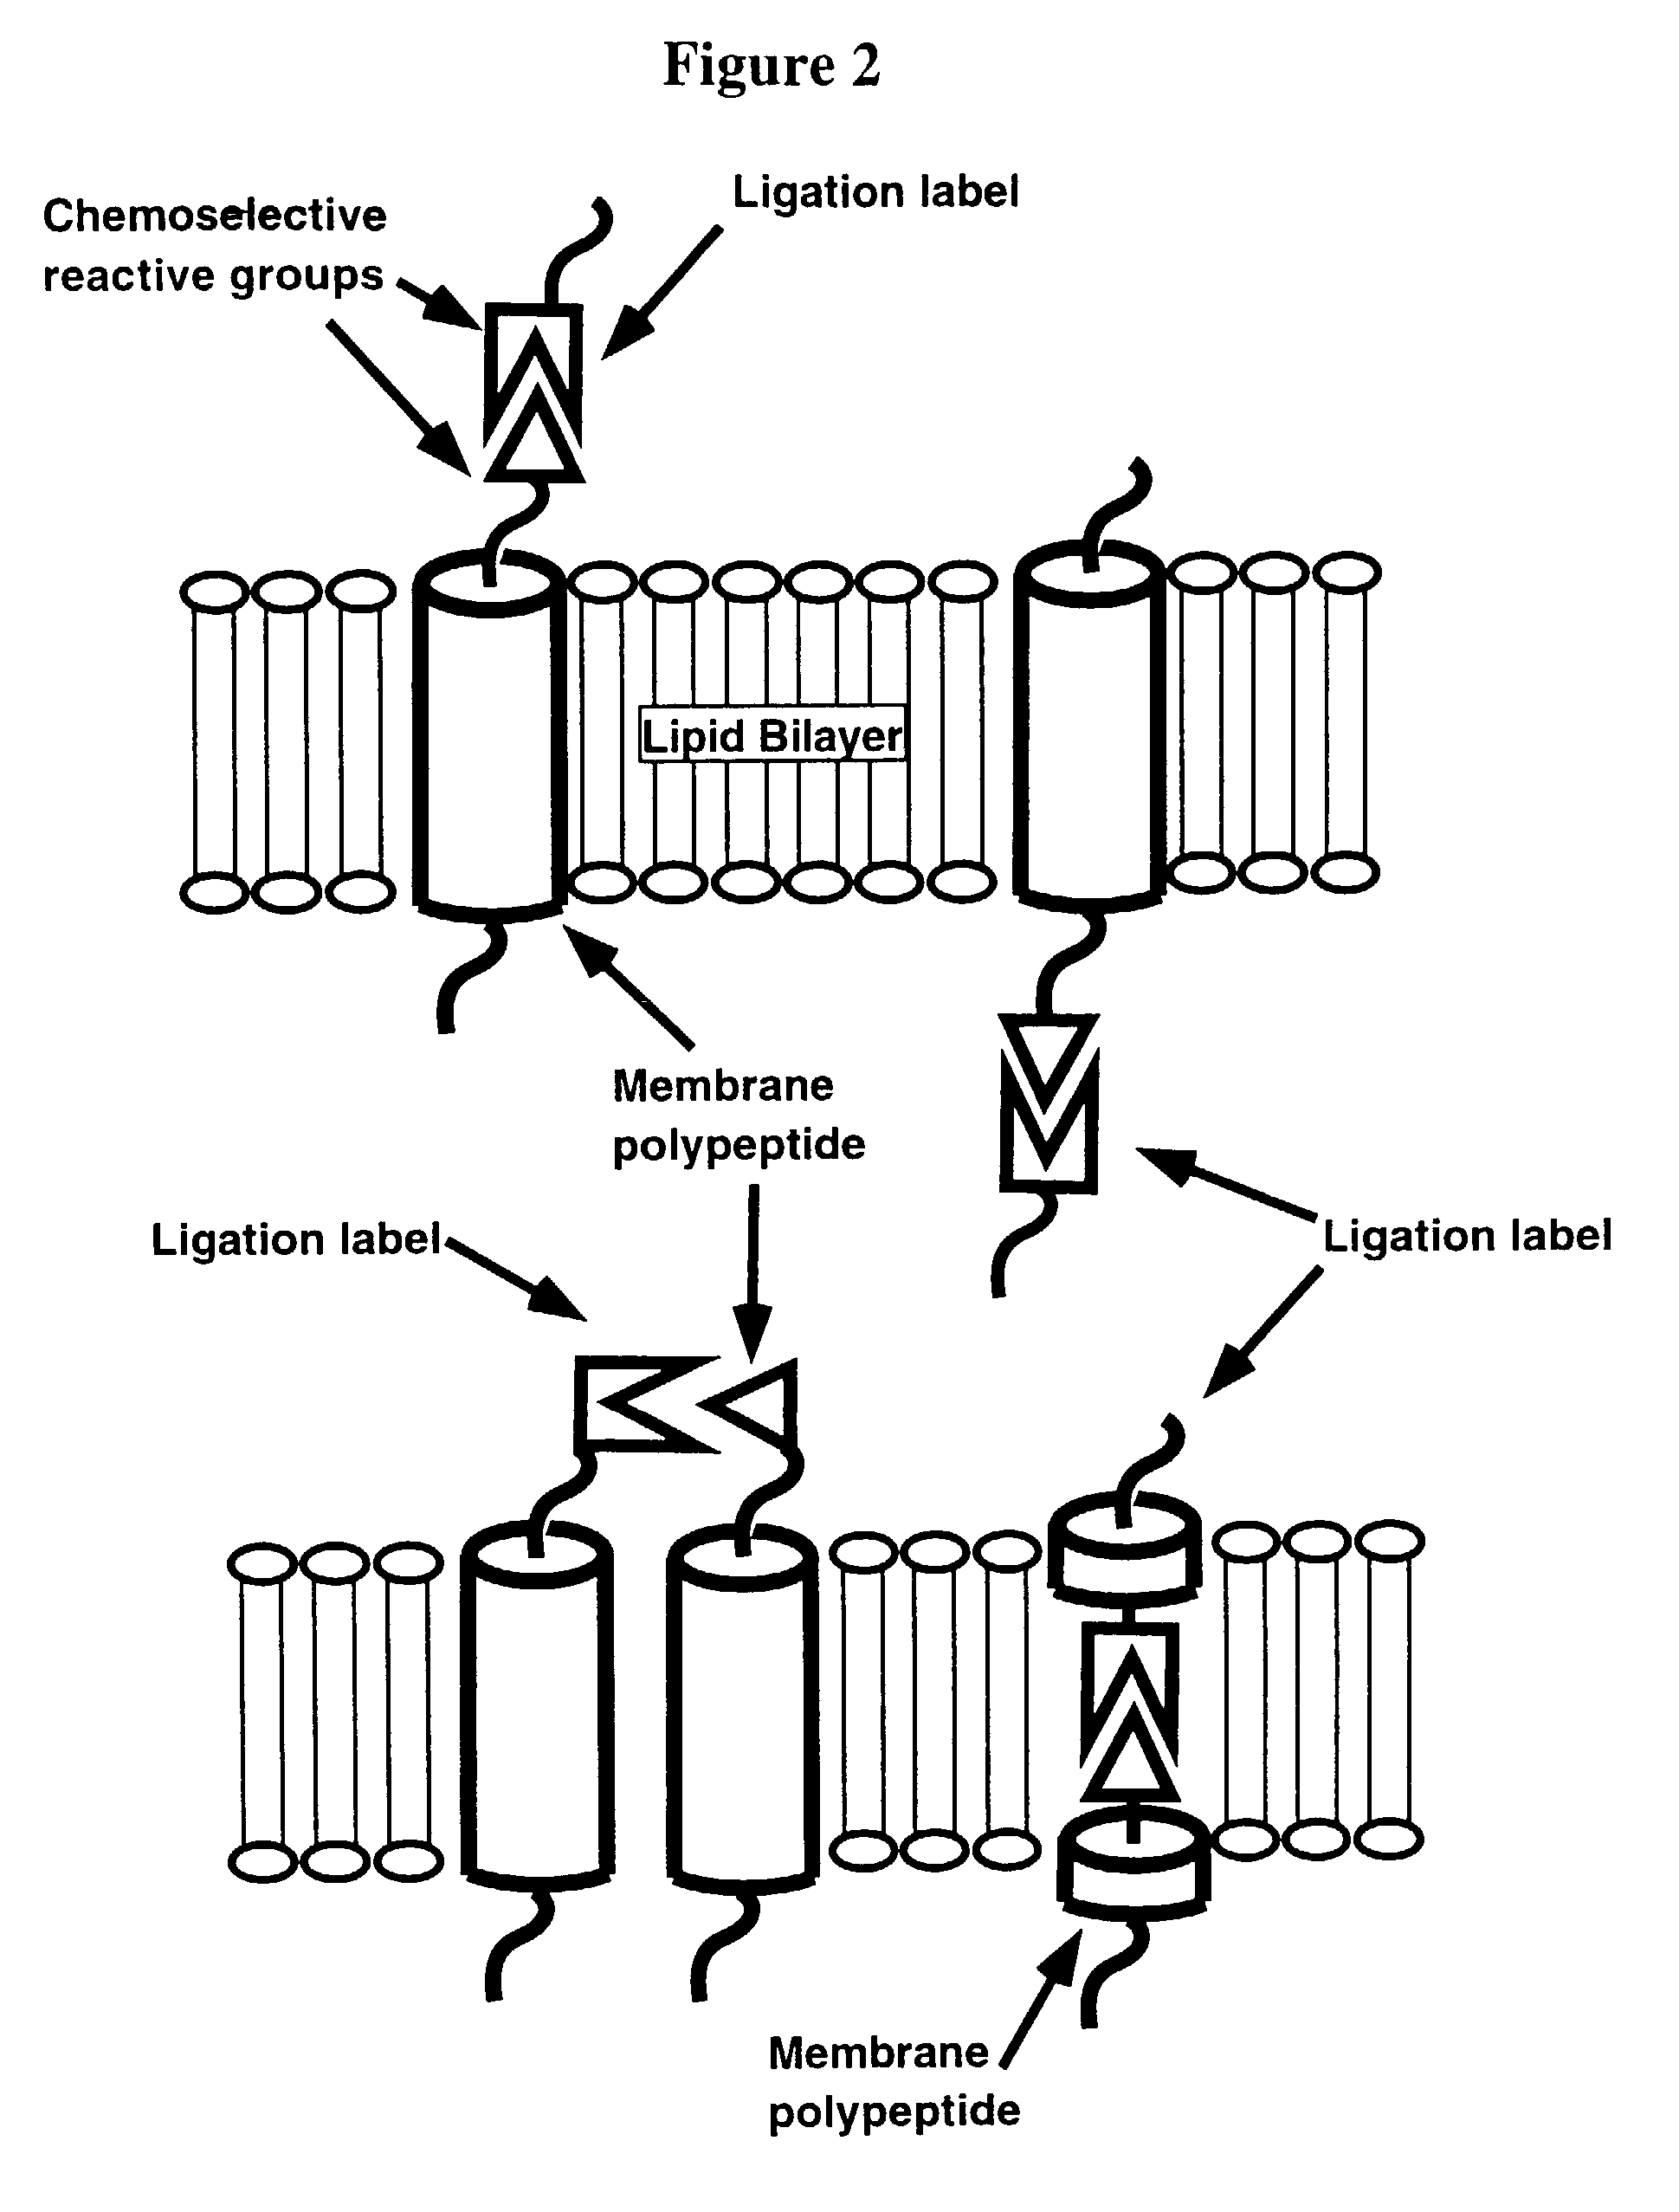 Compositions for lipid matrix-assisted chemical ligation